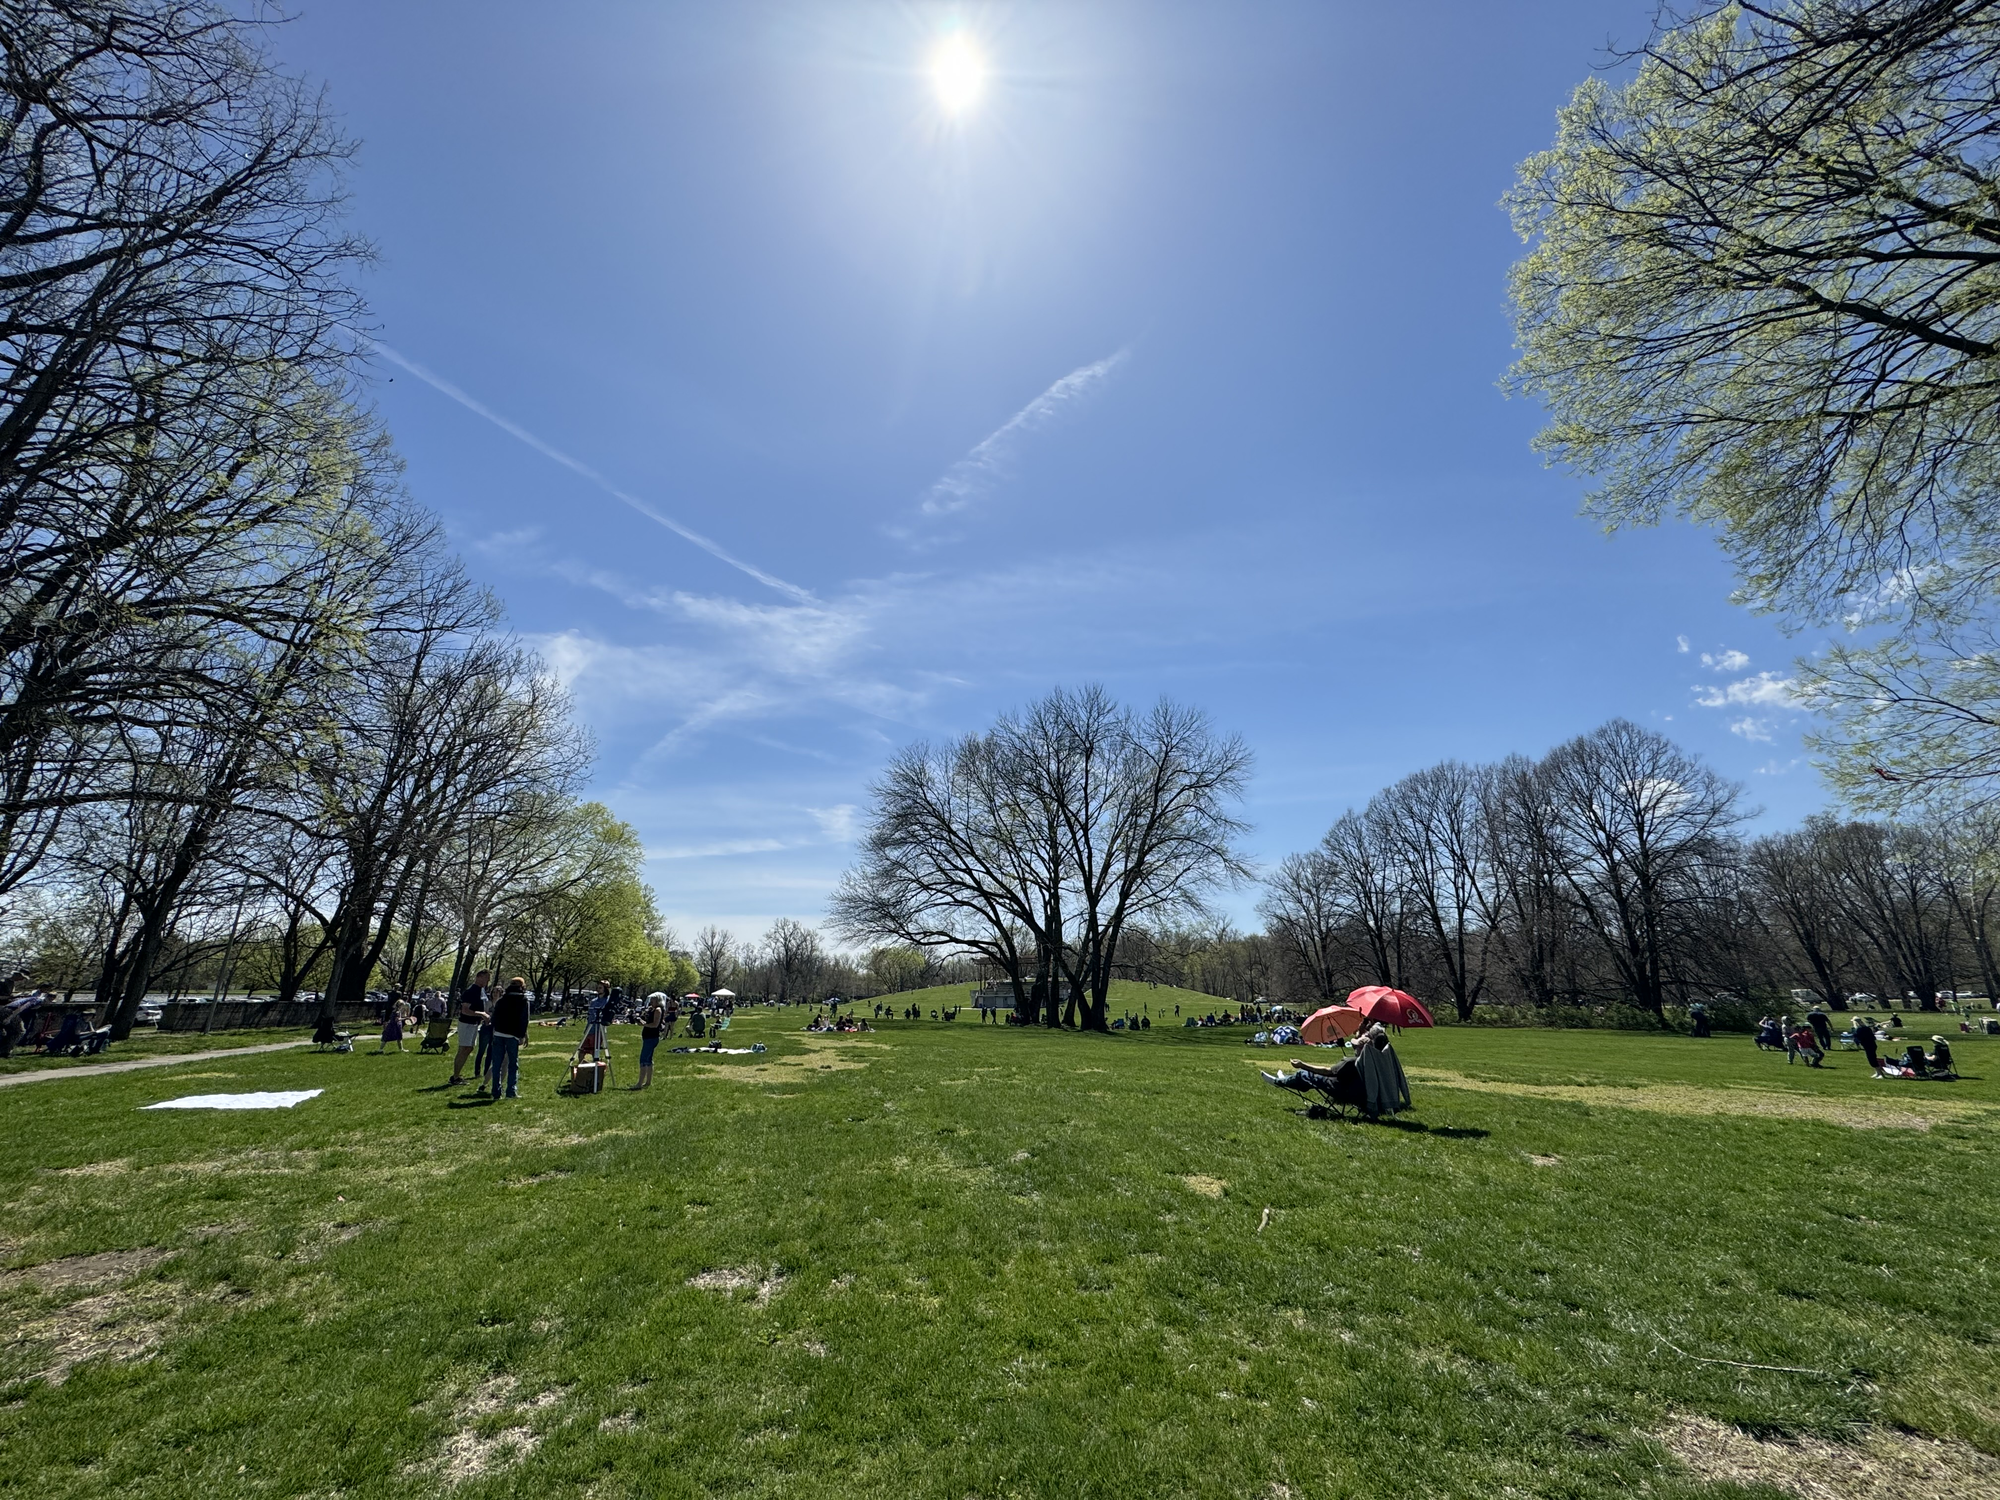 Solar eclipse viewing party in a park